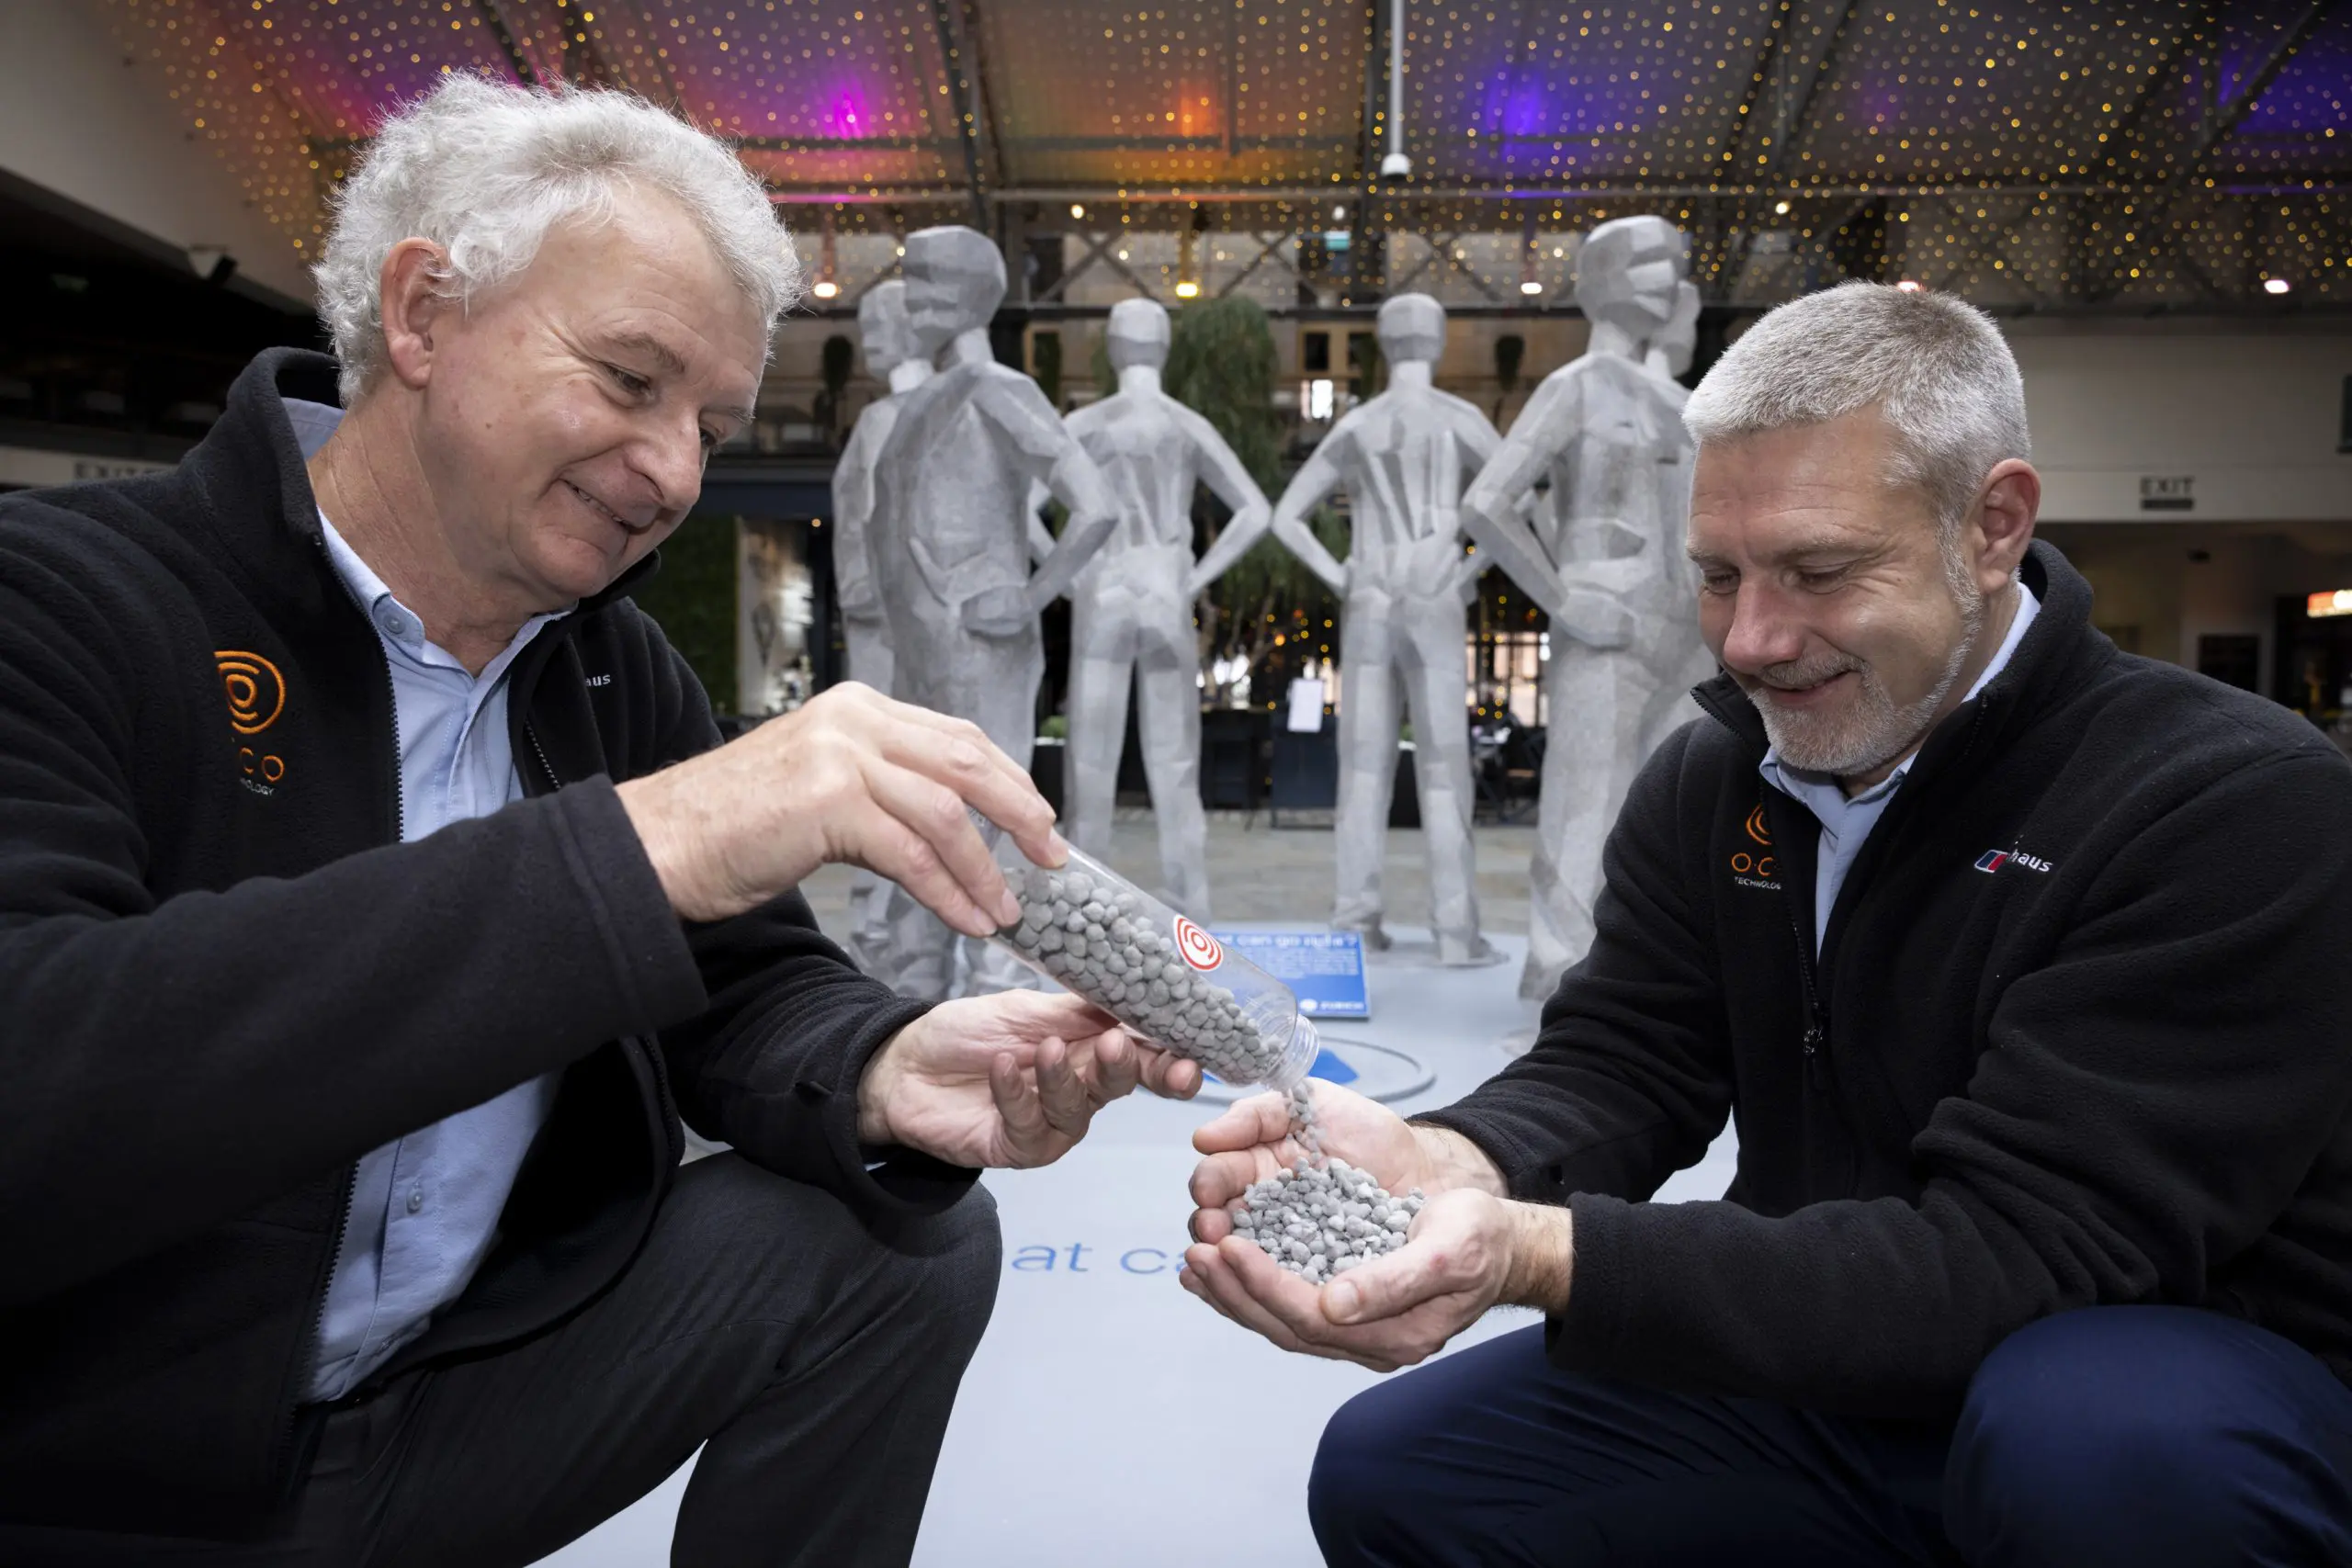 O.C.O Technology’s Technical Director, Stephen Roscoe and Managing Director, Steve Greig, are pictured in front of the statues with a sample of O.C.O’s carbon negative aggregate.